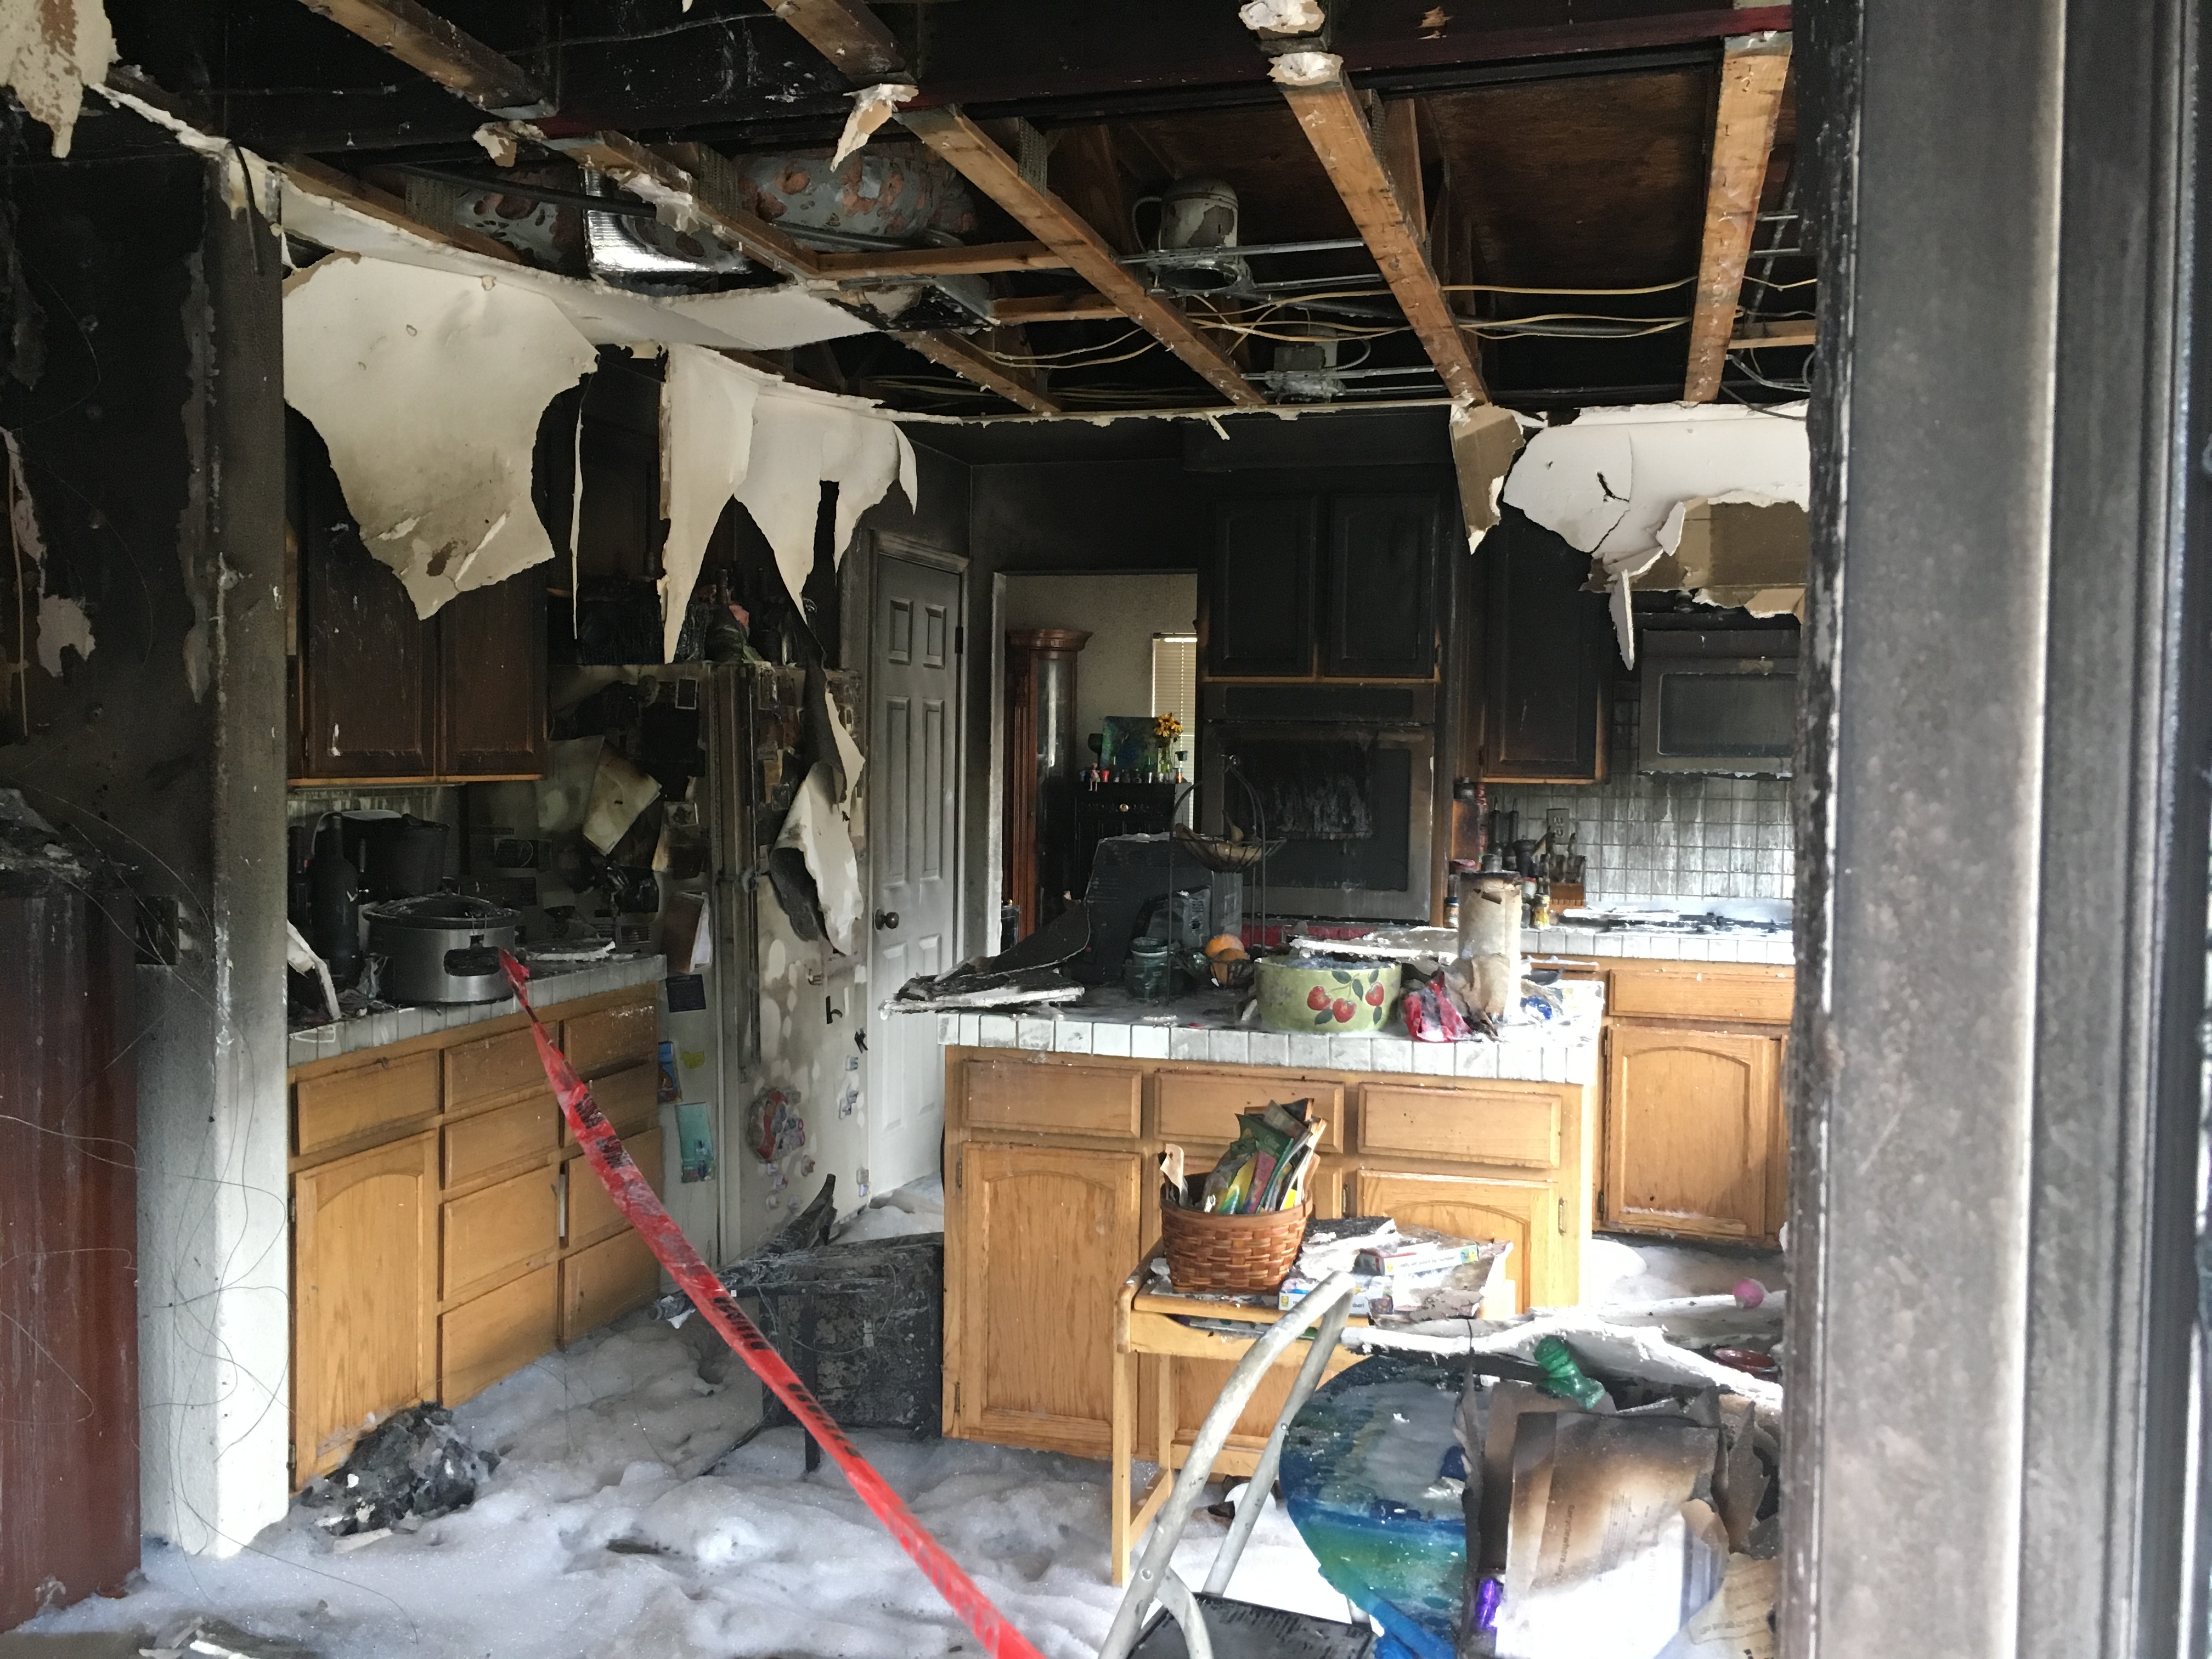 SERVPRO of Antioch has over 15 years experiencing in providing Fire Cleanup services